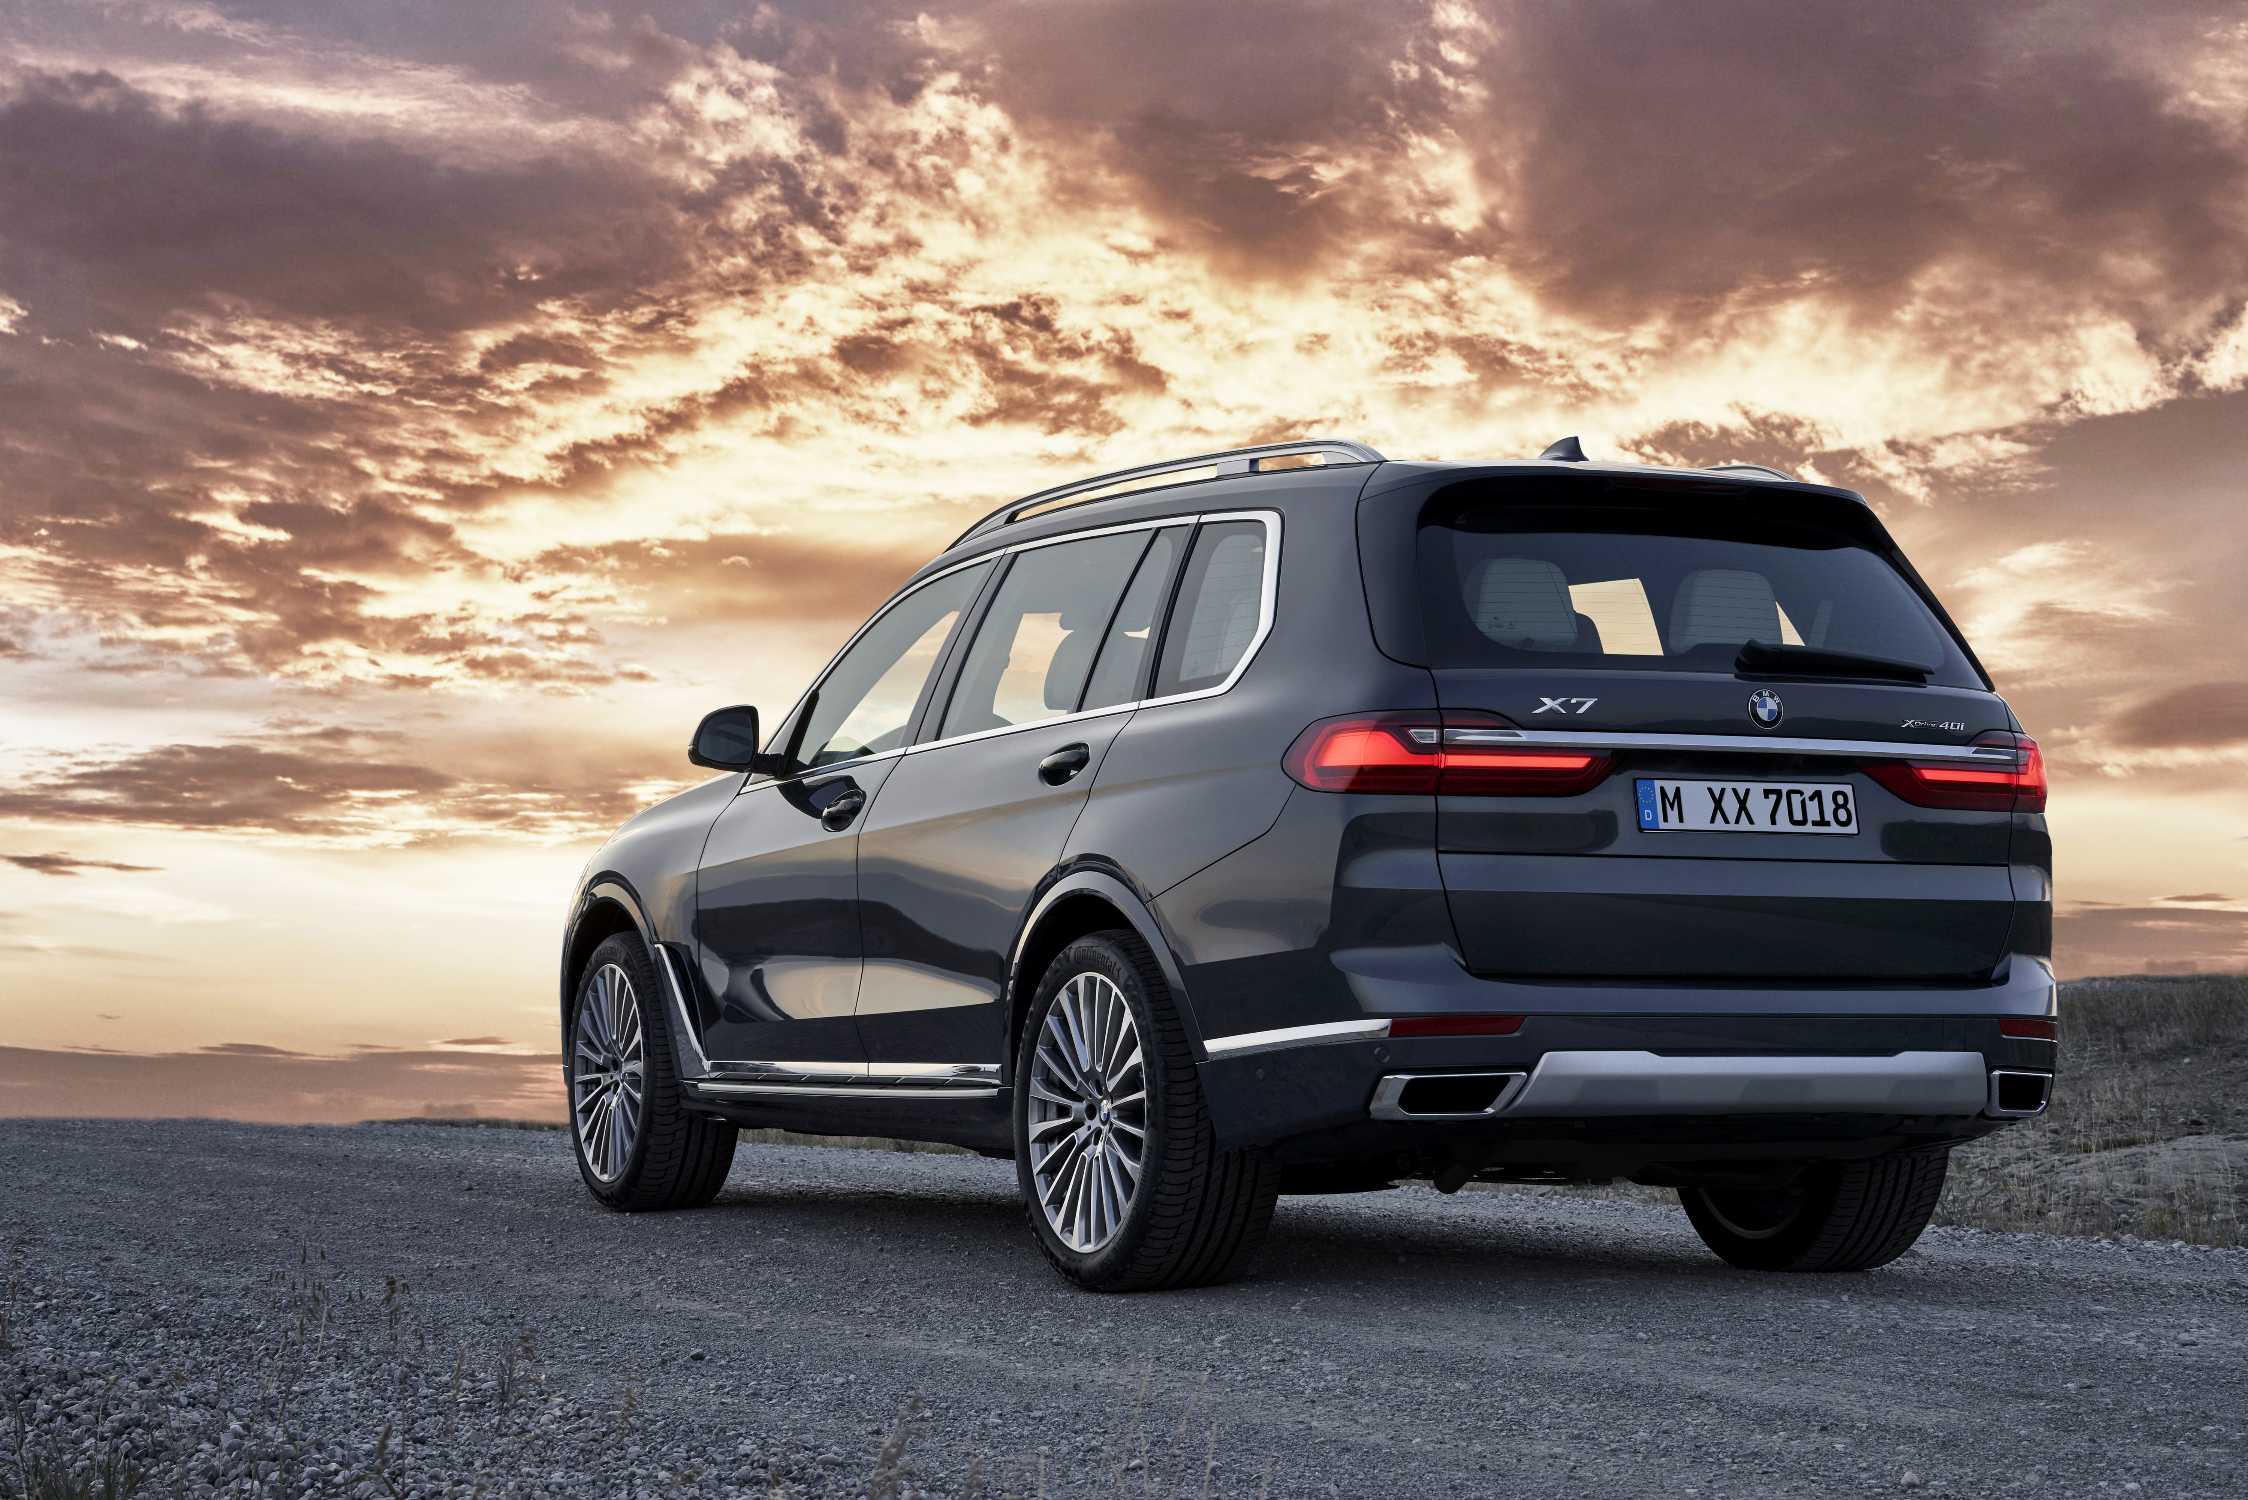 The First-Ever 2019 BMW X7 Sports Activity Vehicle.